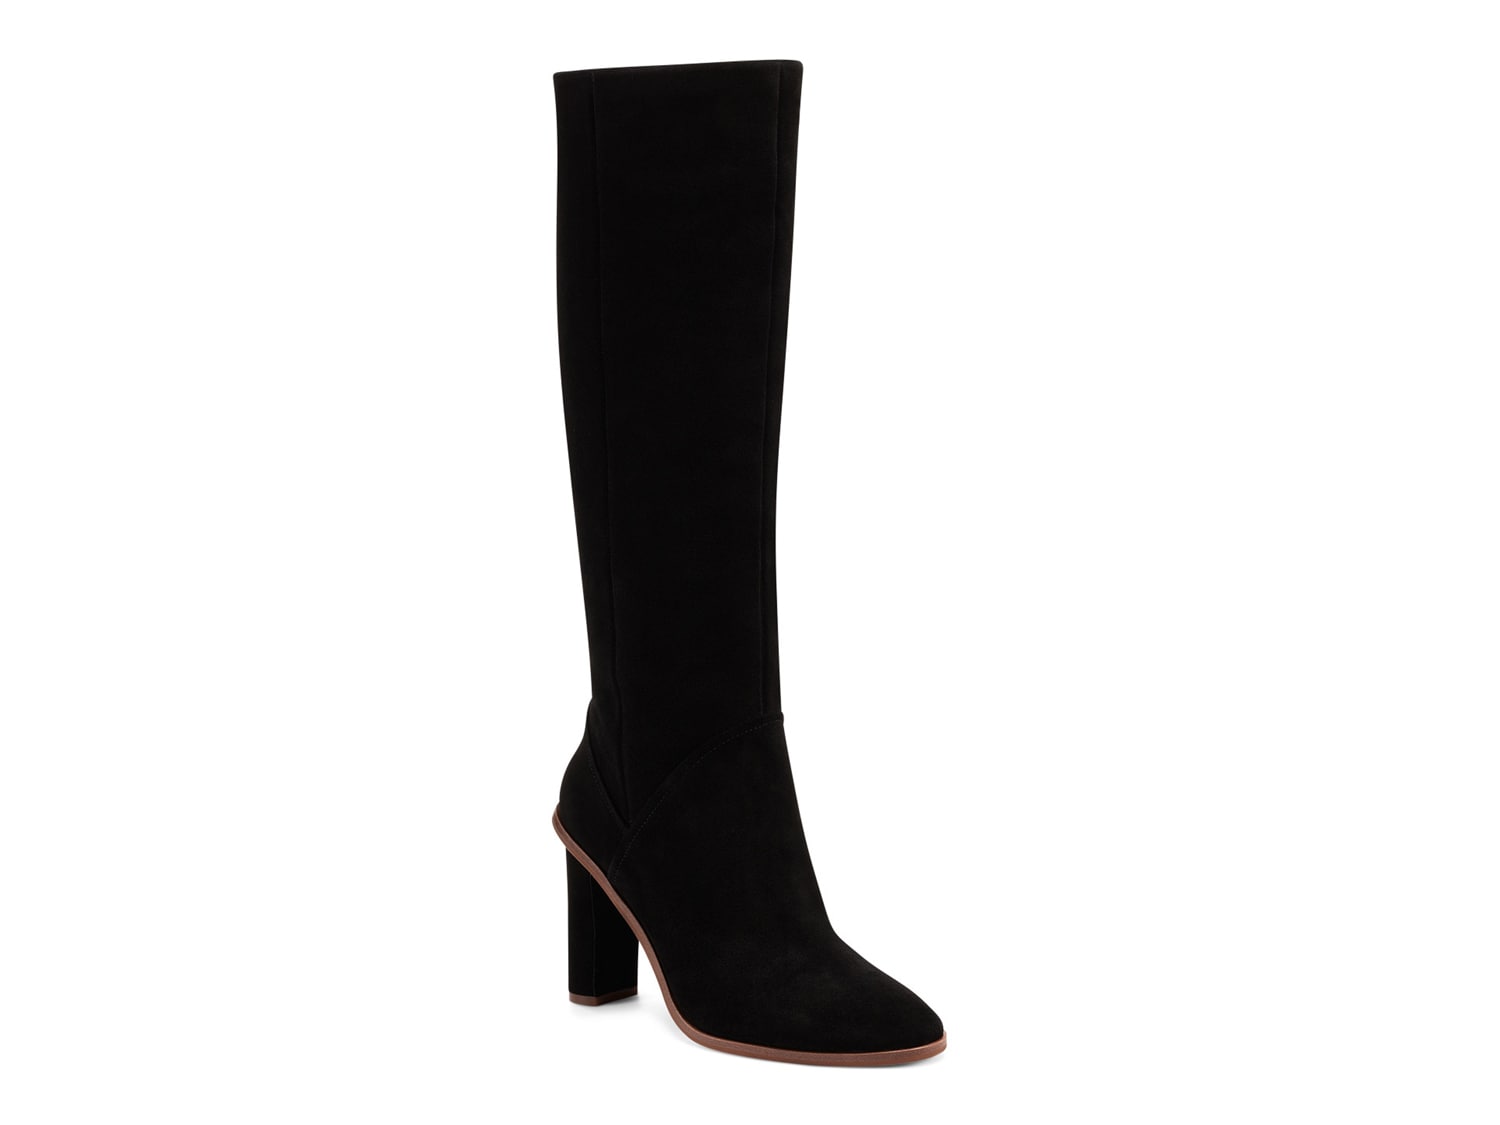 Vince Camuto Phranzie Boot - Free Shipping | DSW